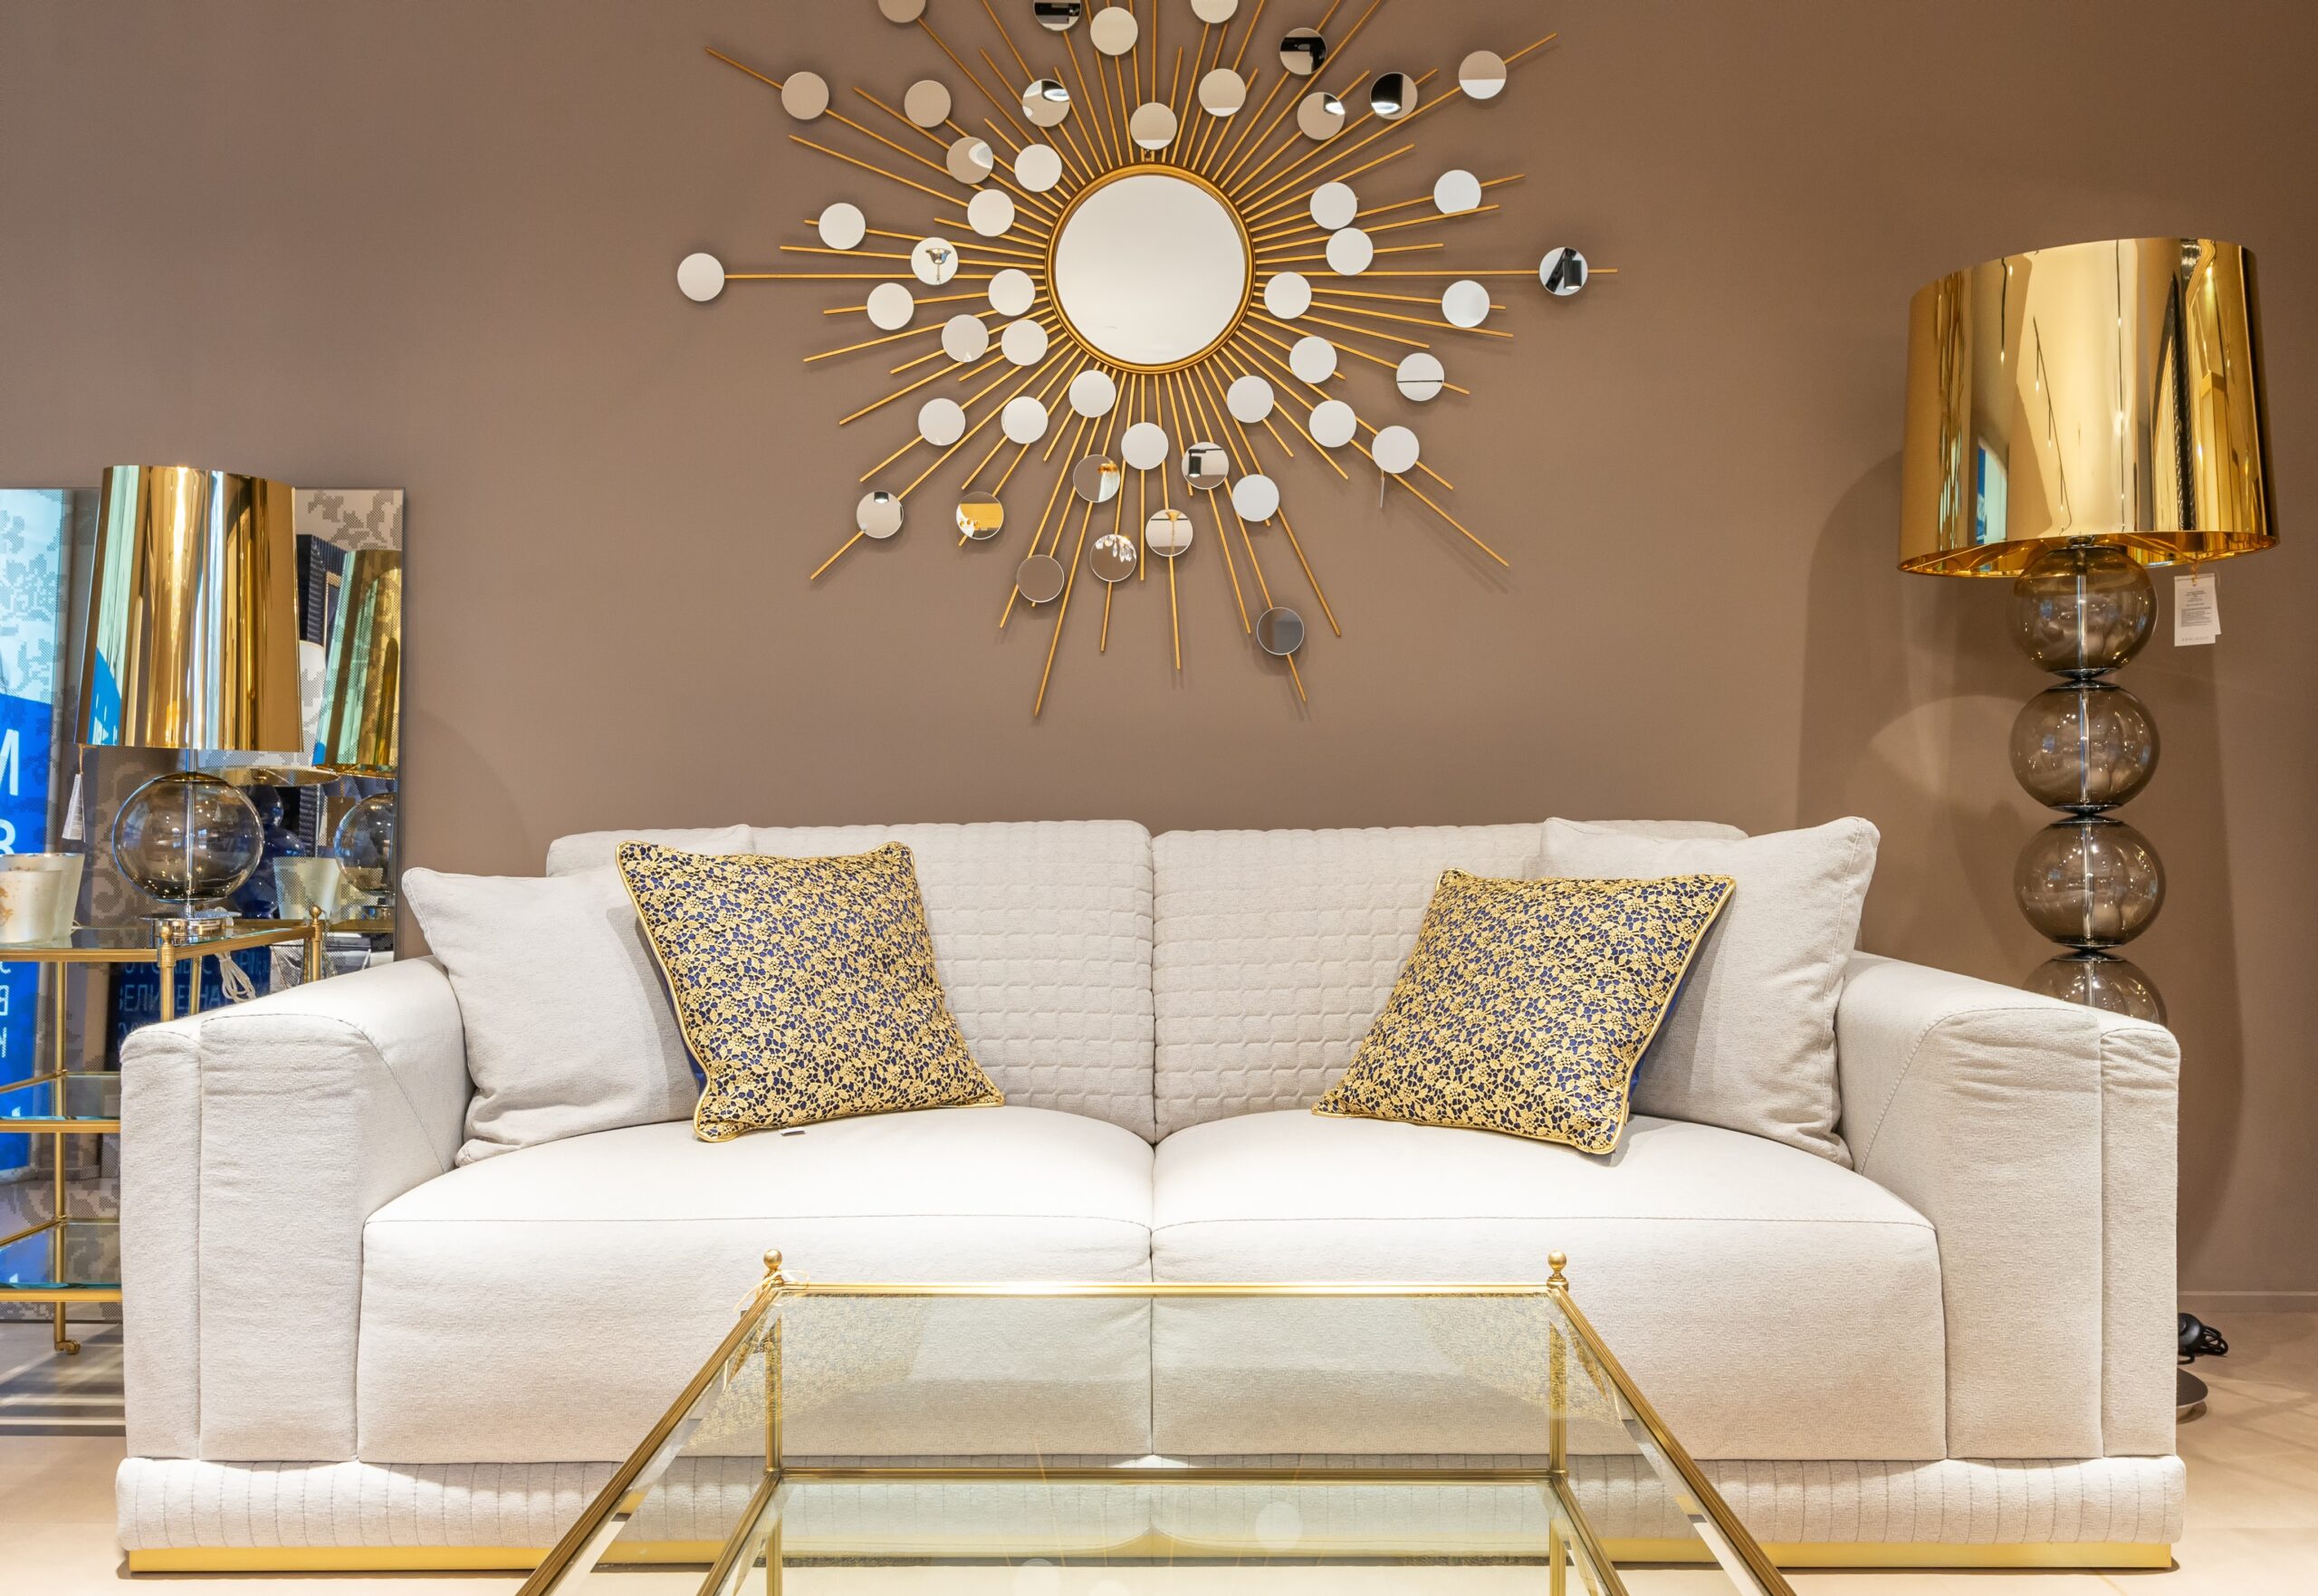 10 Creative Living Room Wall Lighting Ideas to Brighten Up Your Space